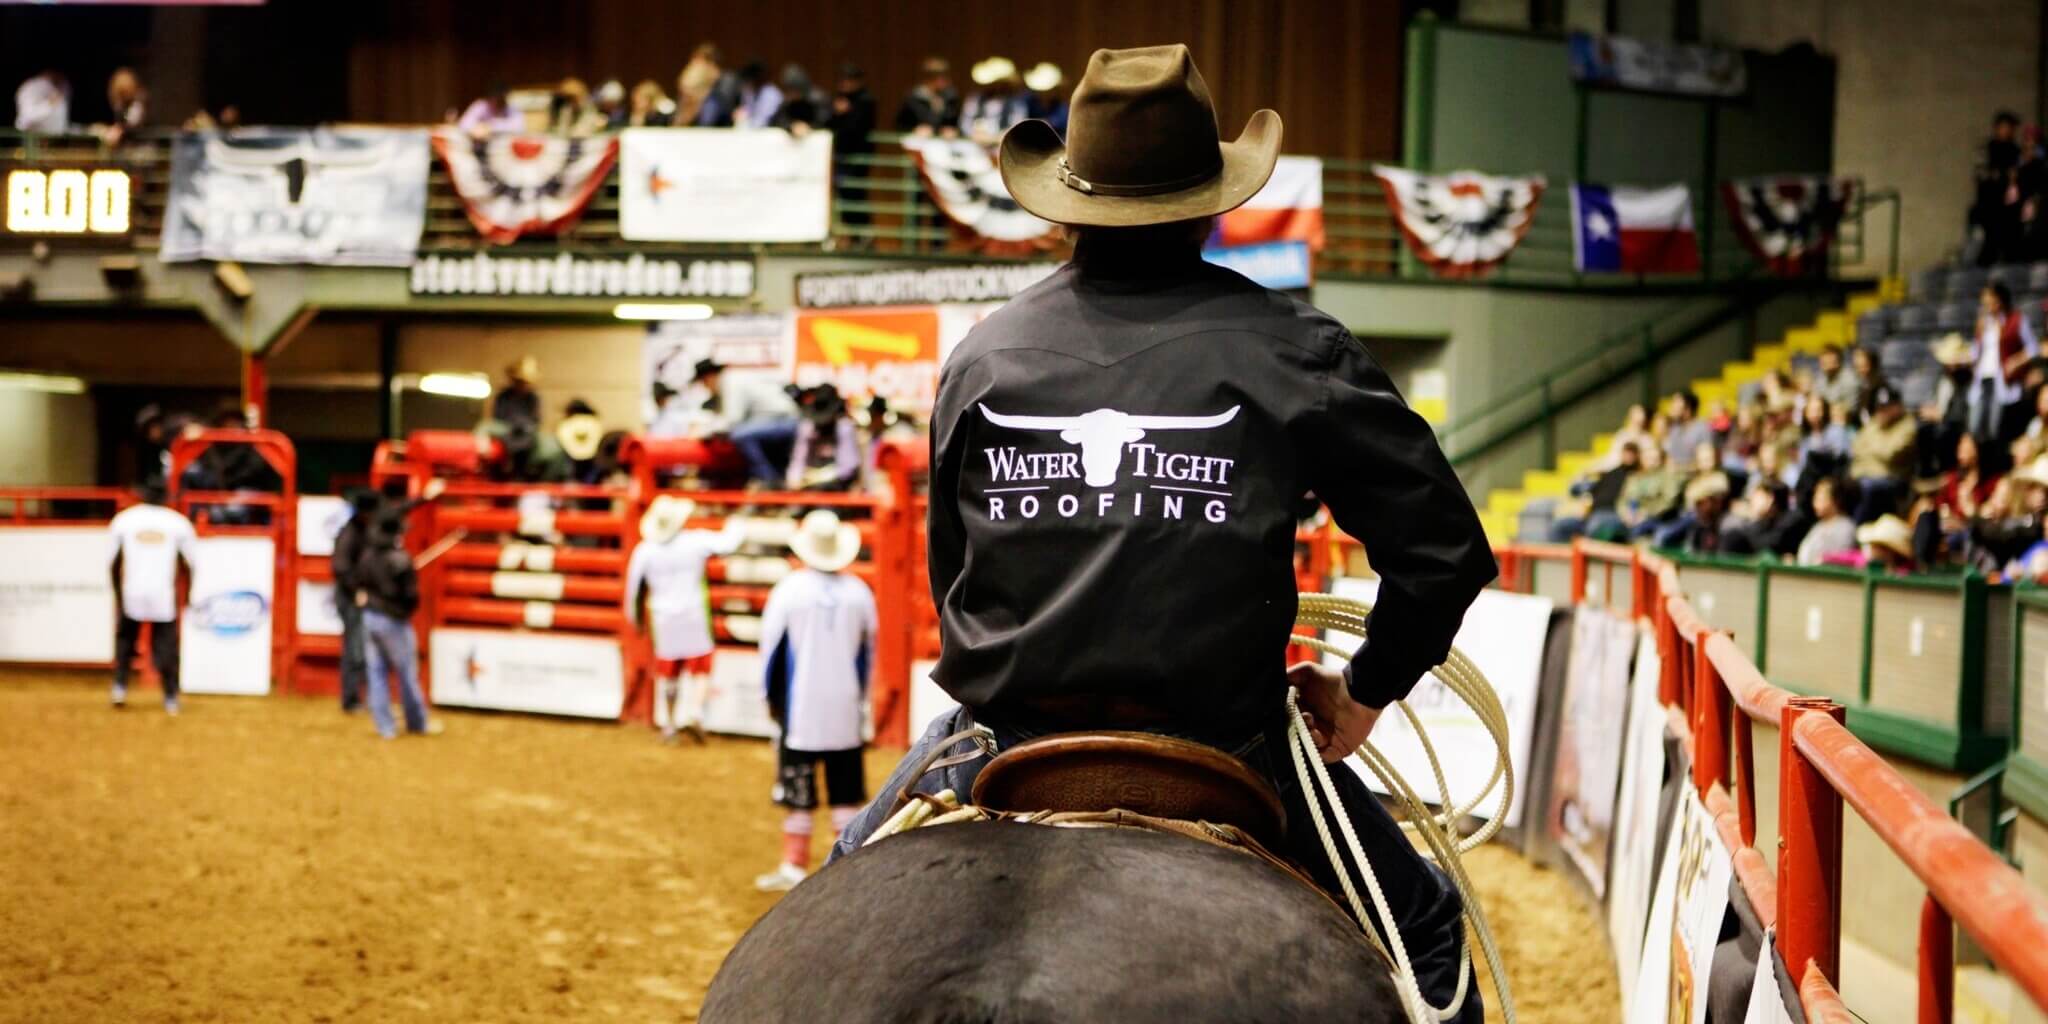 Man on a horse with watertight roofing logo on shirt